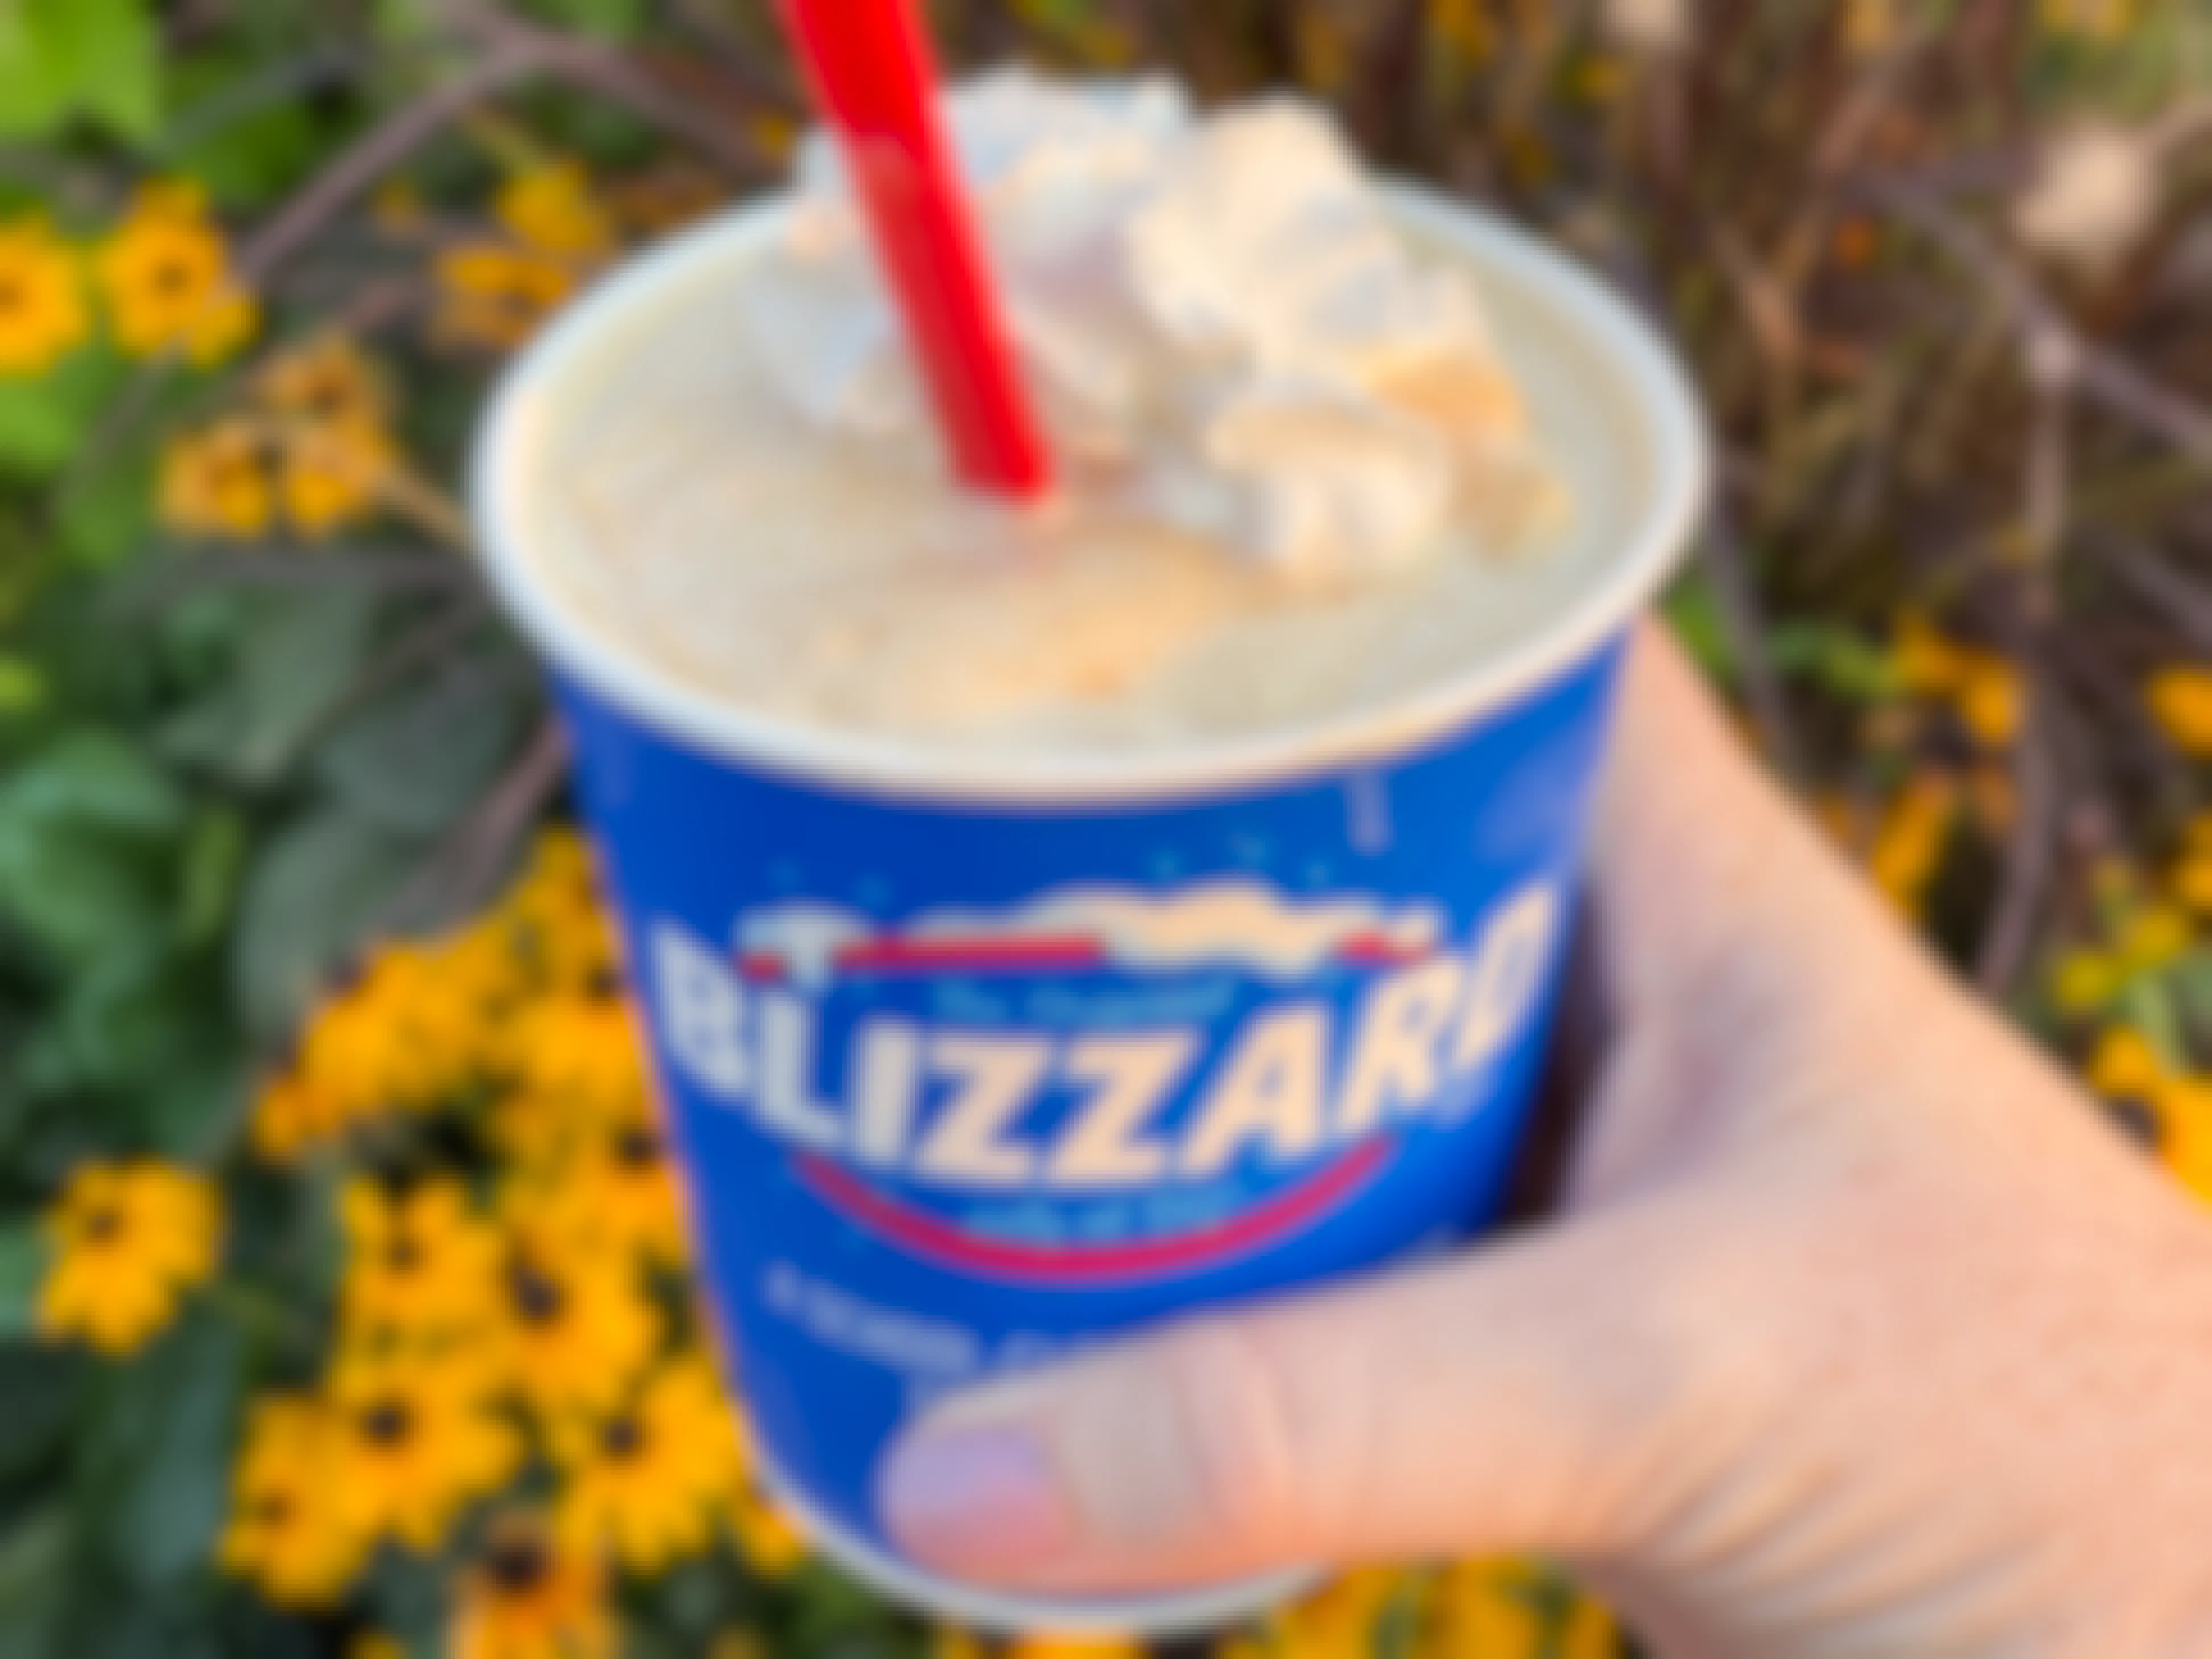 A person's hand holding a Dairy Queen pumpkin pie blizzard in front of some flowers.